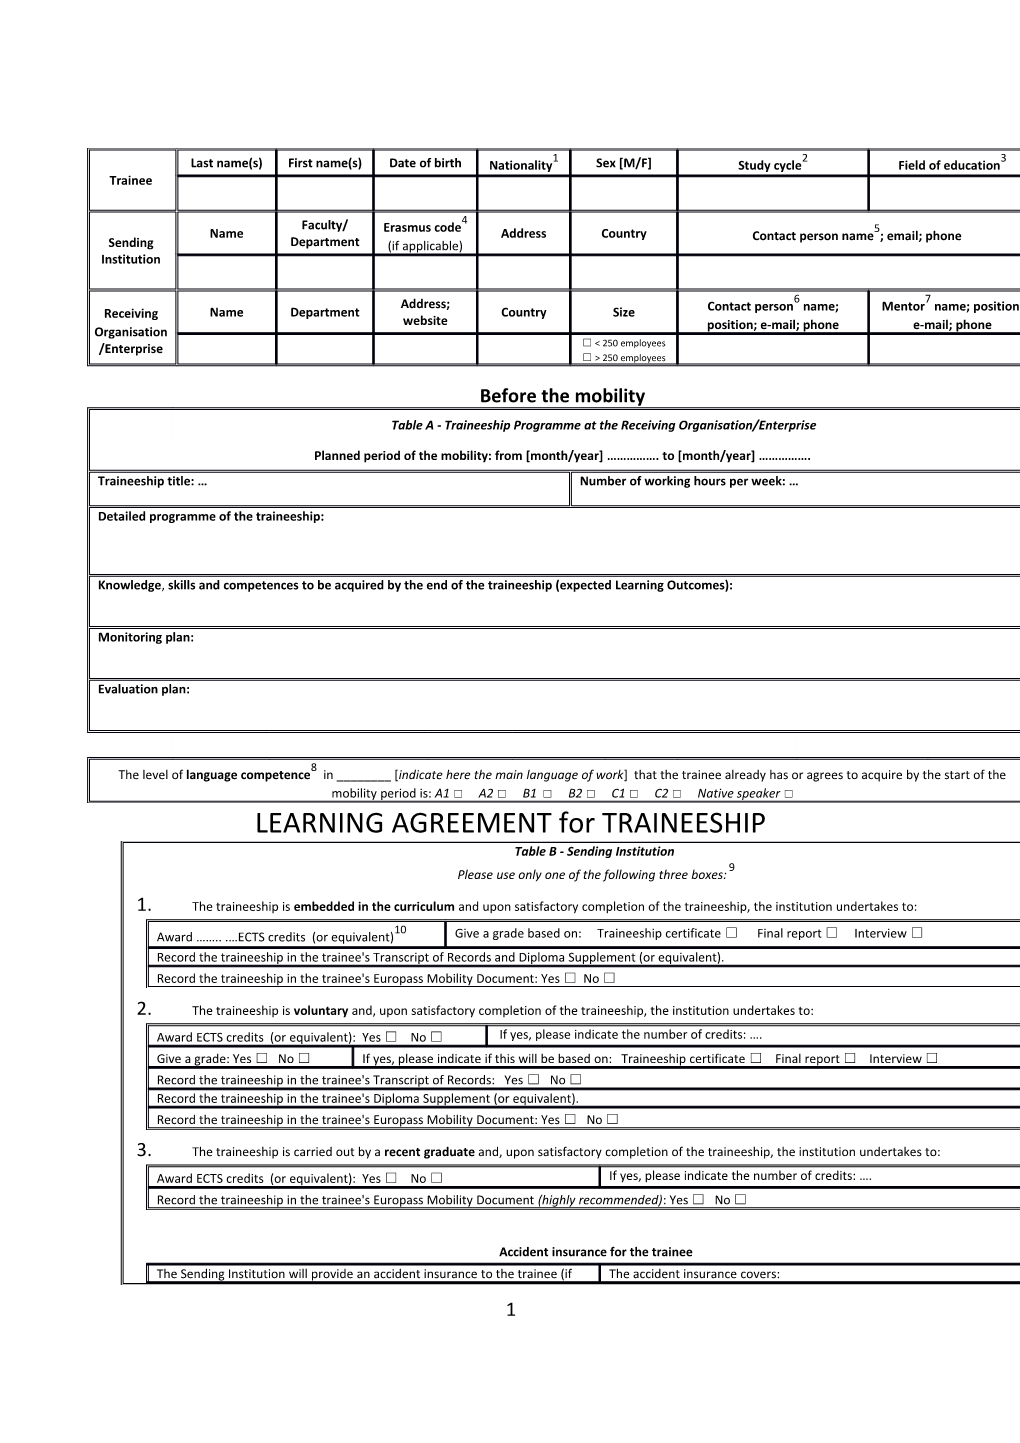 LEARNING AGREEMENT for TRAINEESHIP